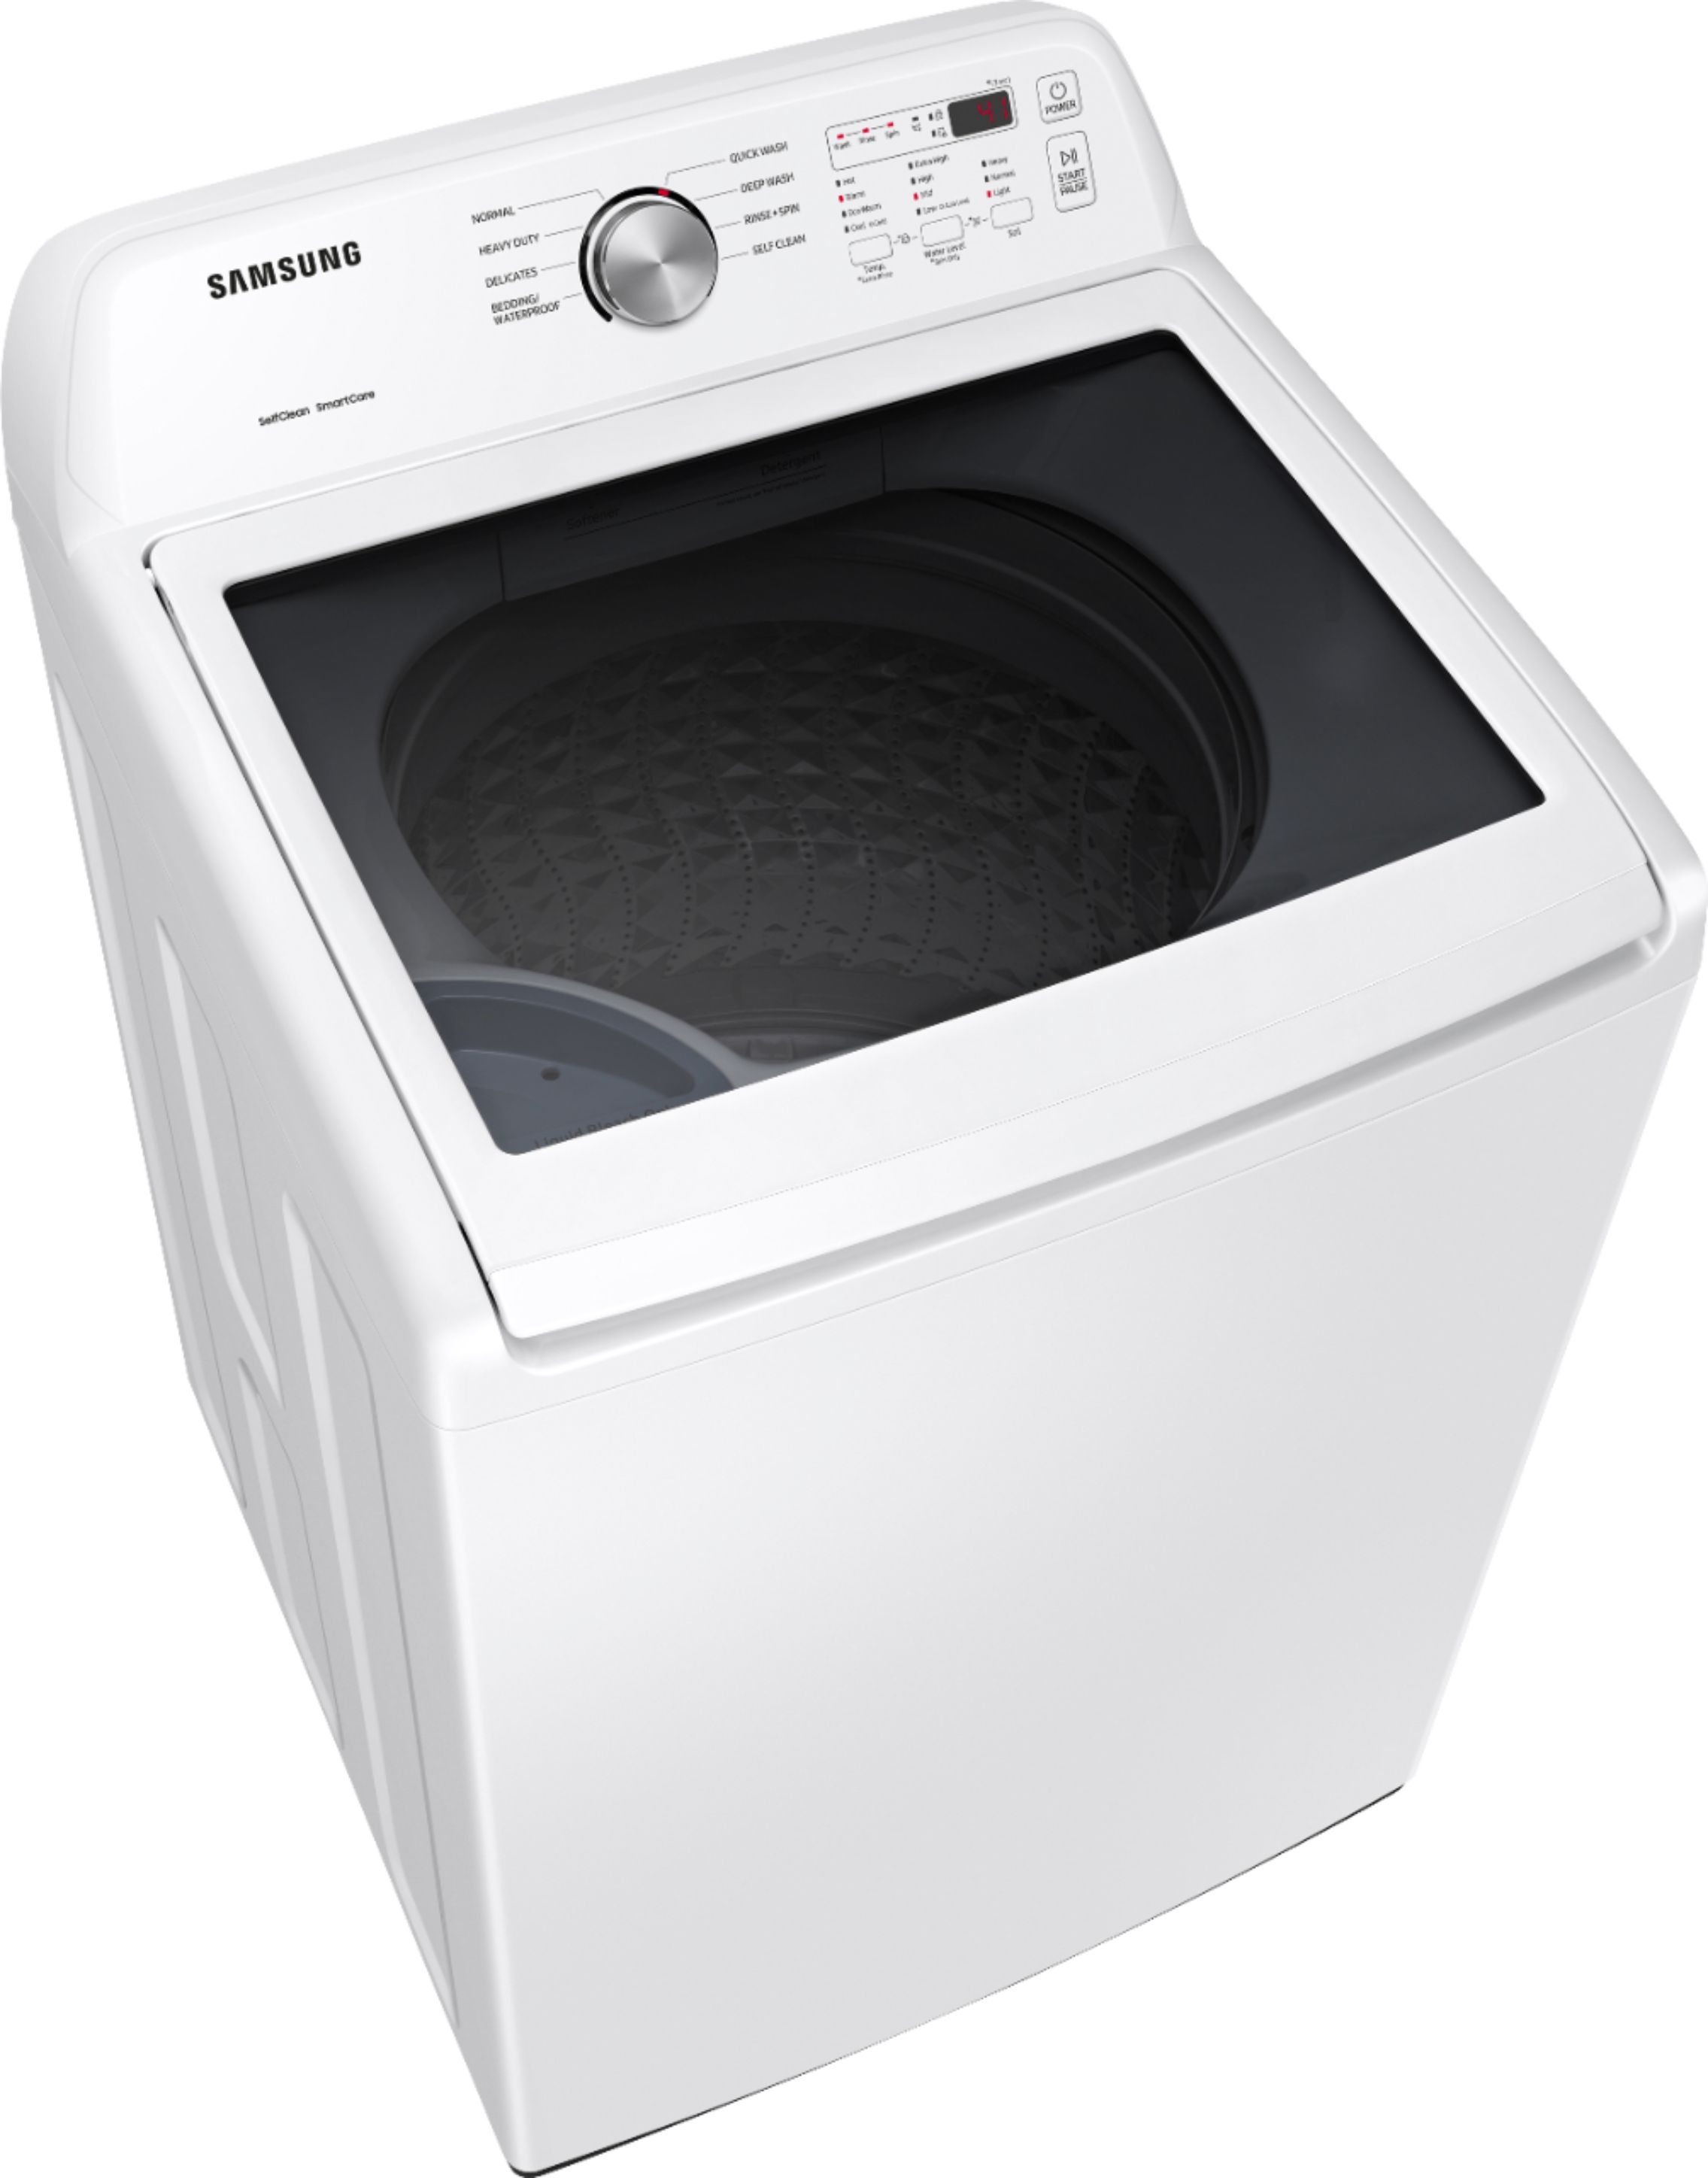 Angle View: Samsung - 4.5 Cu. Ft. High-Efficiency Top Load Washer with Vibration Reduction Technology+ - White